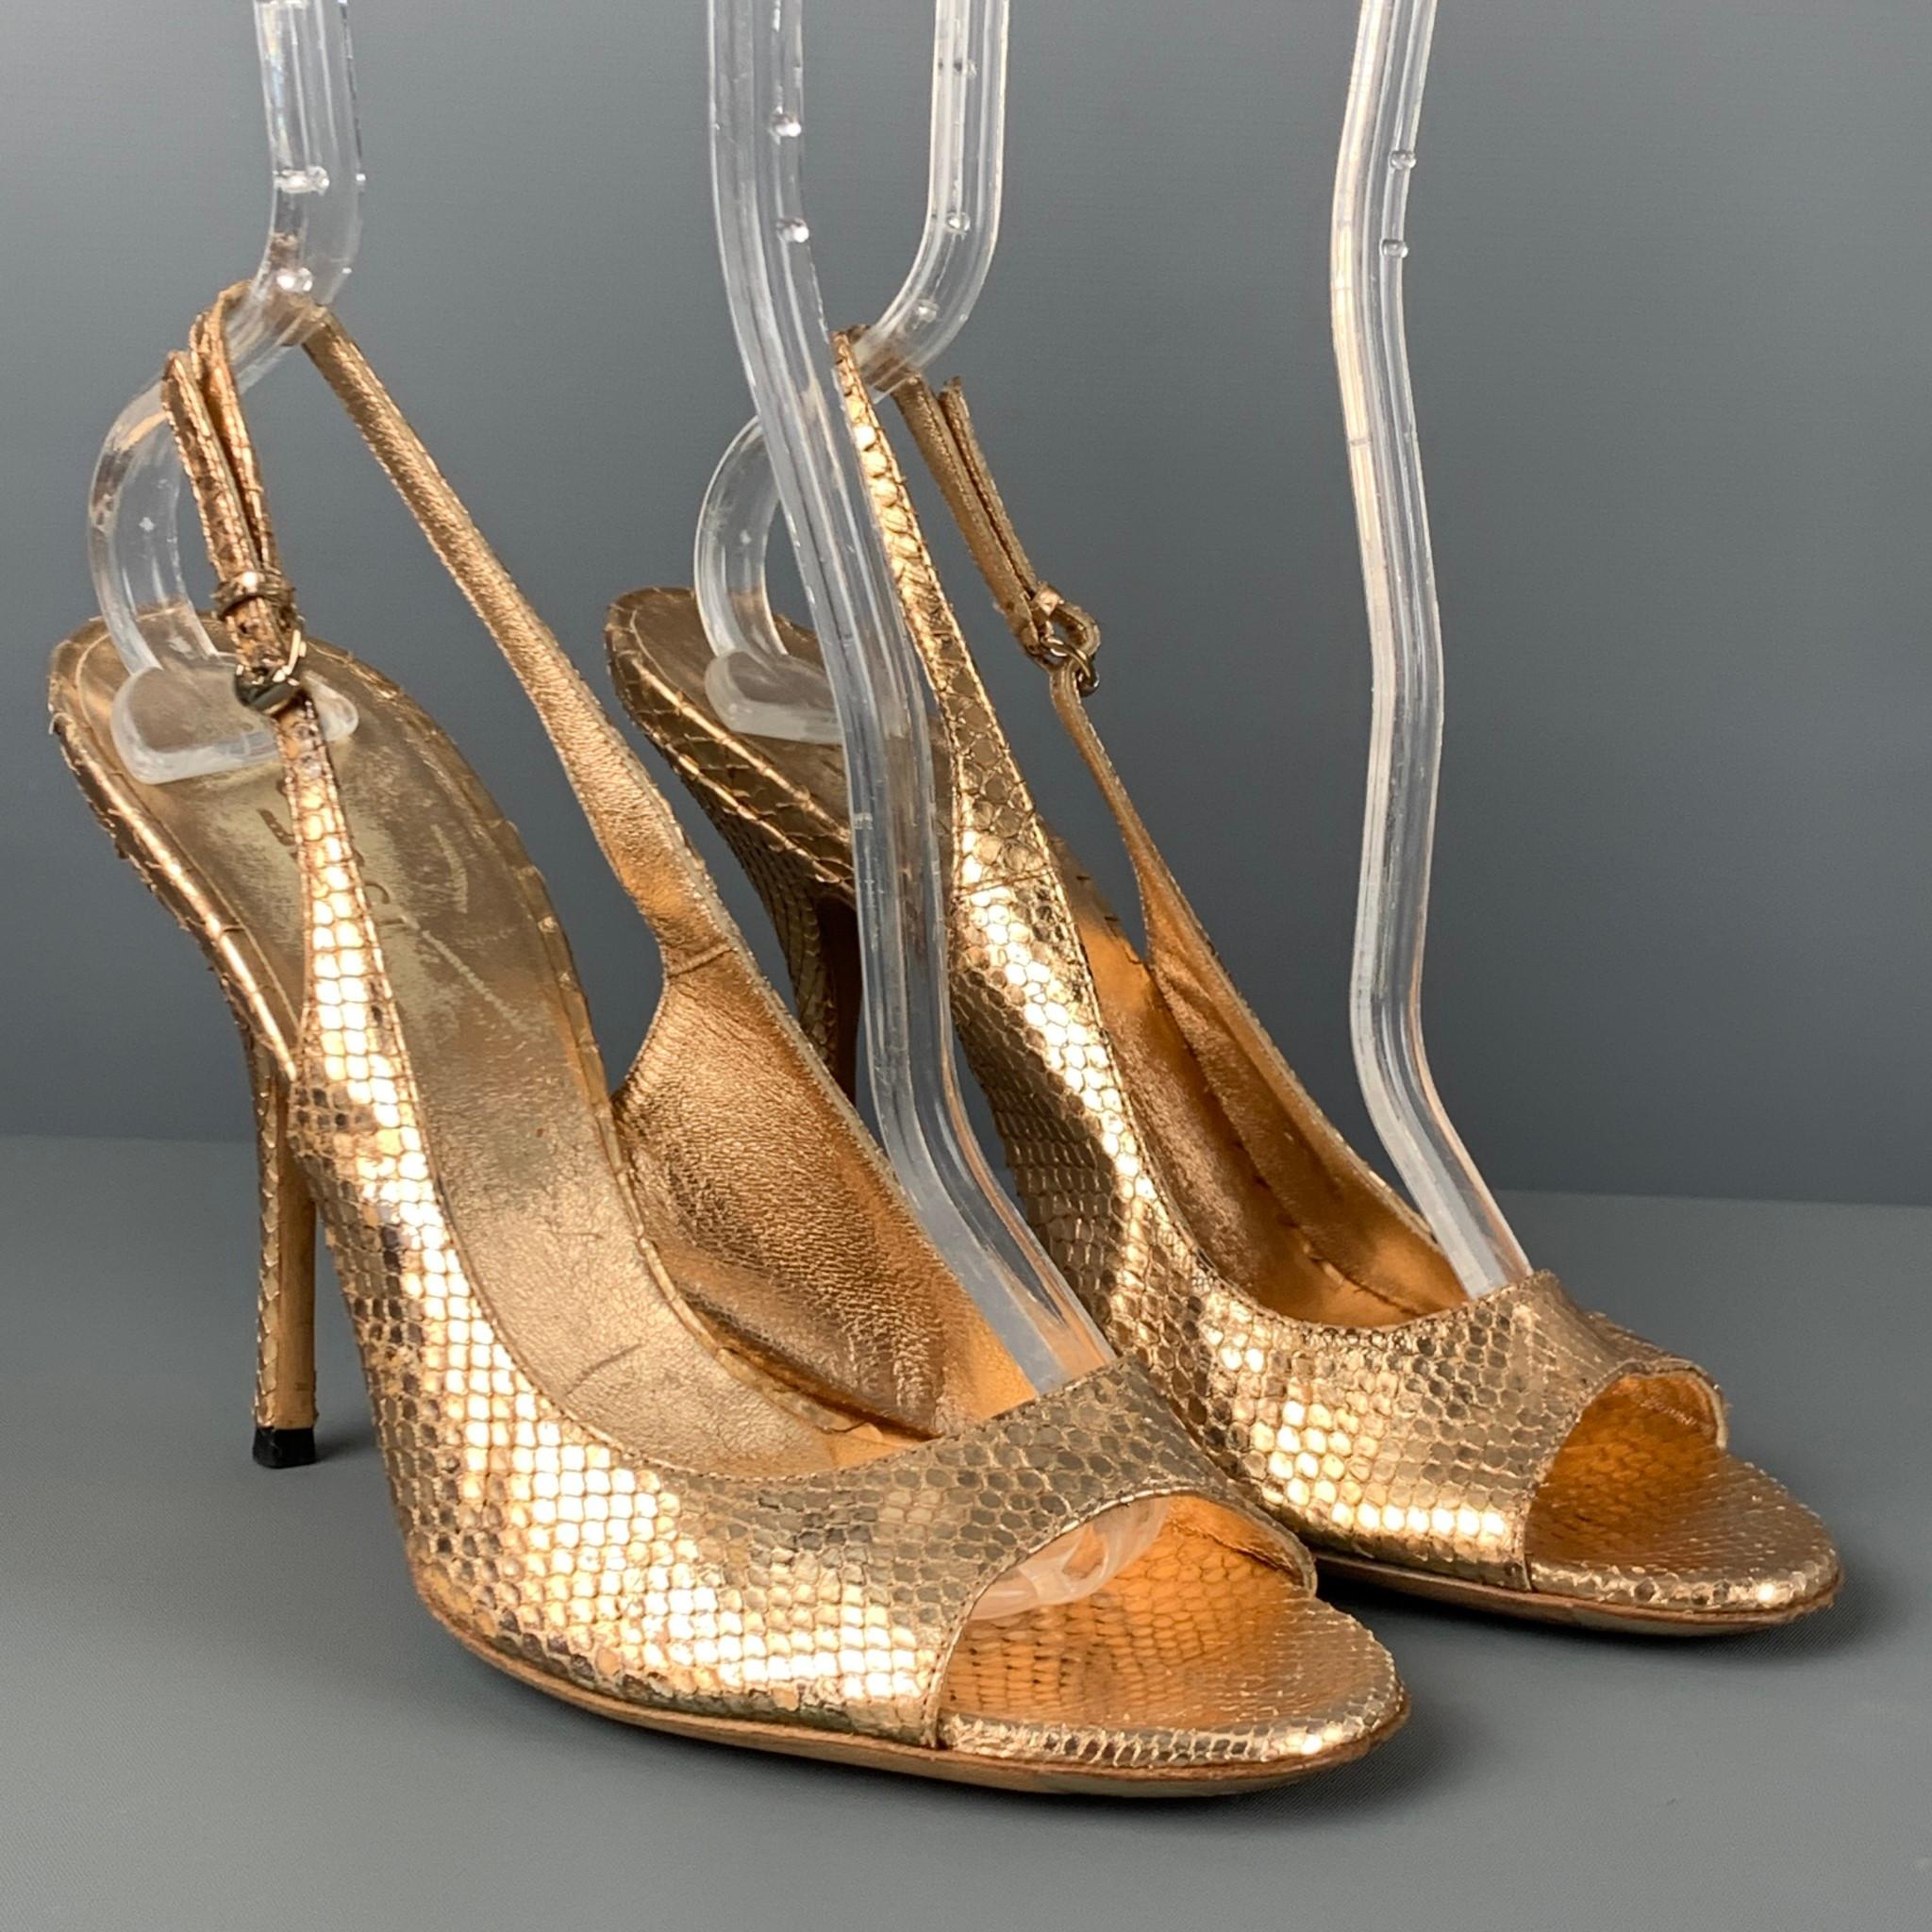 GUCCI sandals comes in a gold metallic snakeskin leather featuring a adjustable sling back design, open toe, and a stiletto heel. Made in Italy.

Good Pre-Owned Condition. Light wear throughout. As-is.
Marked: 37 C

Measurements:

Heel: 4.25 in.